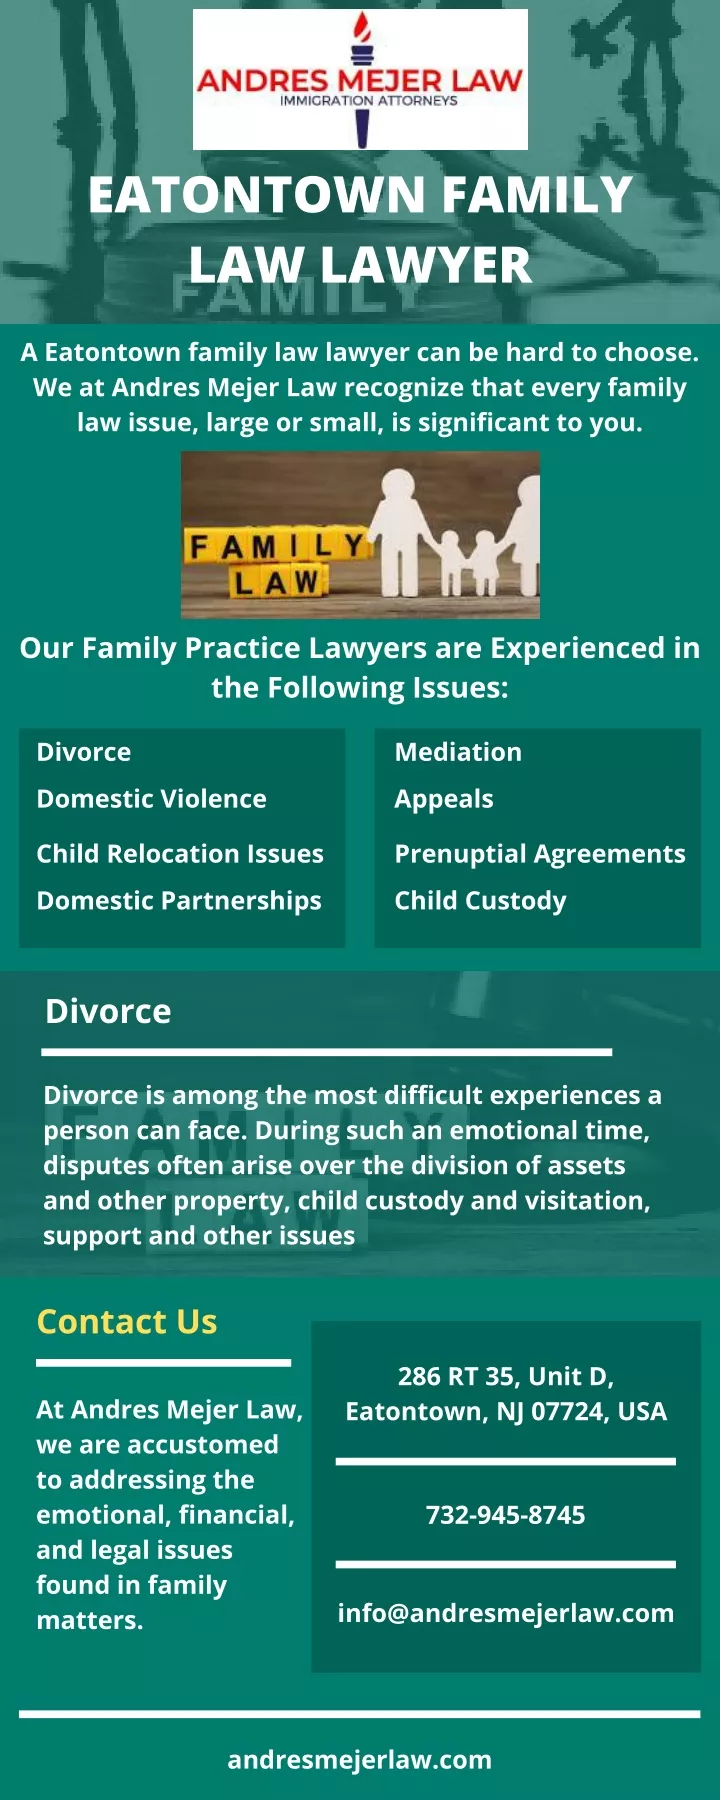 eatontown family law lawyer